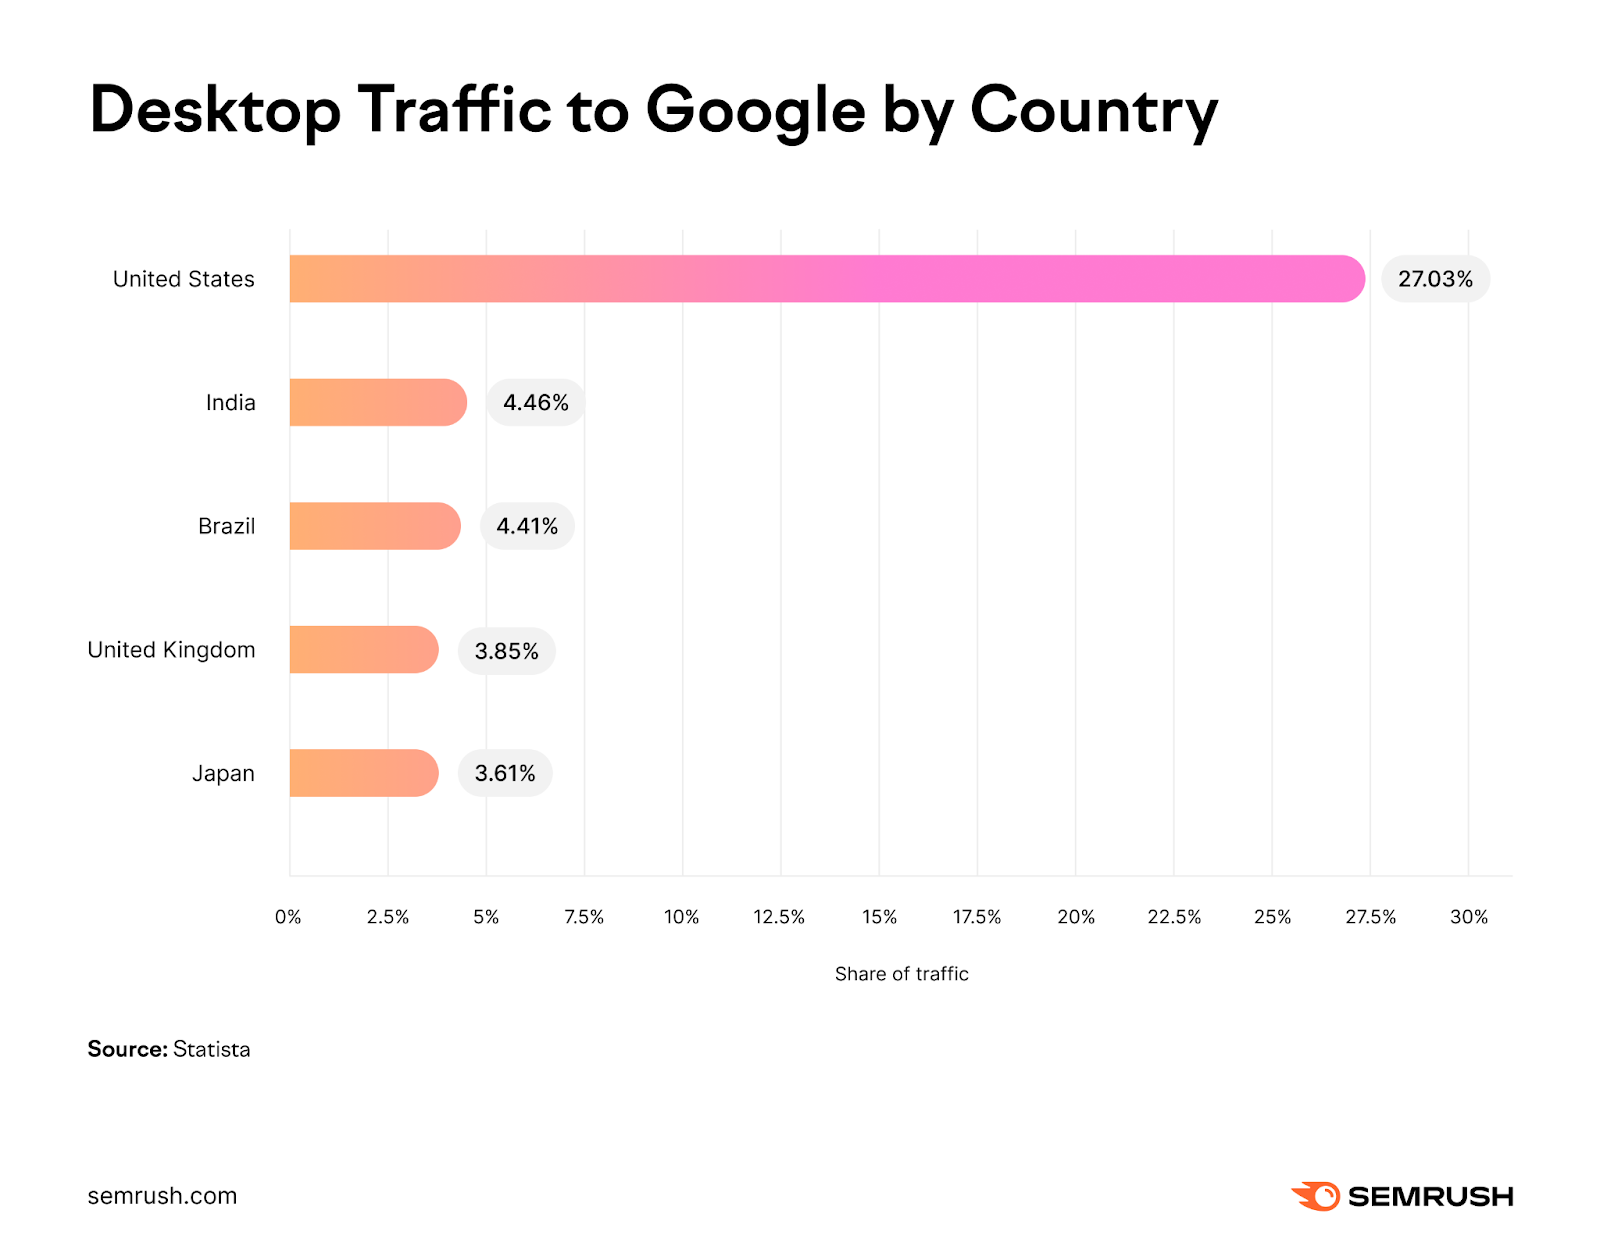 A graph showing desktop traffic to Google by country